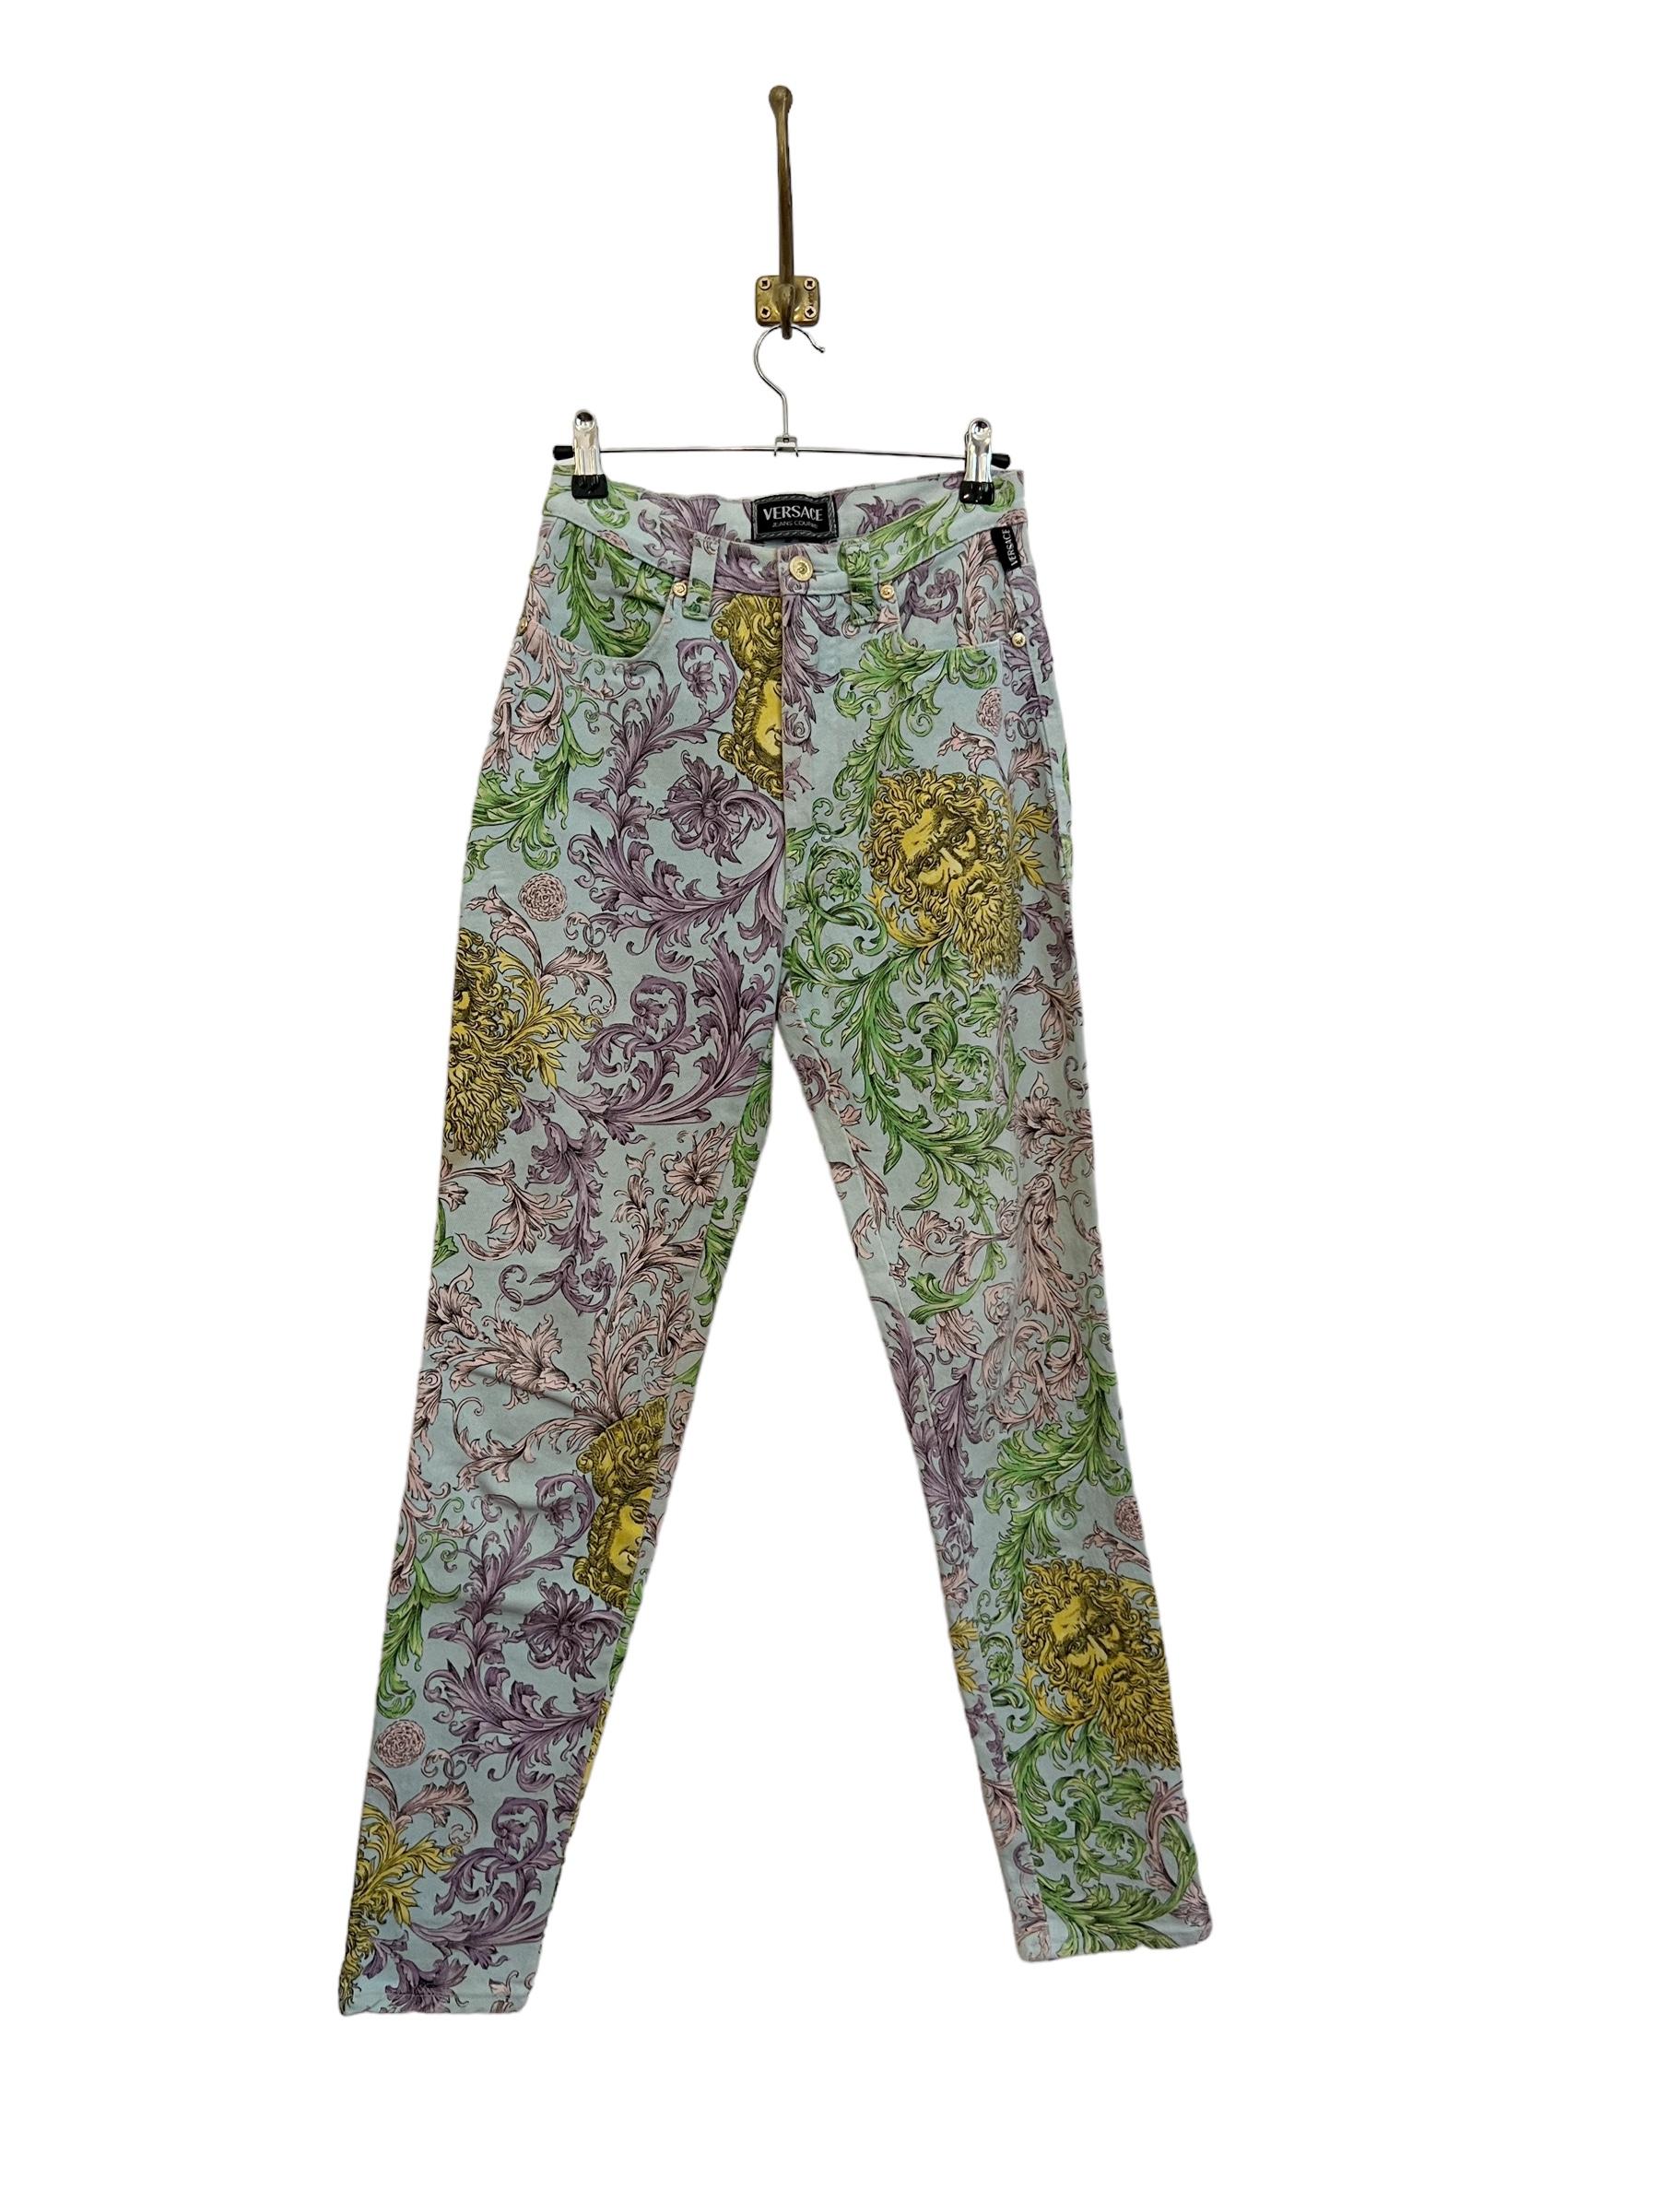 Pastel 1990's Vintage Gianni Versace Baroque Rococo High Waisted Jeans  In Good Condition For Sale In Sheffield, GB